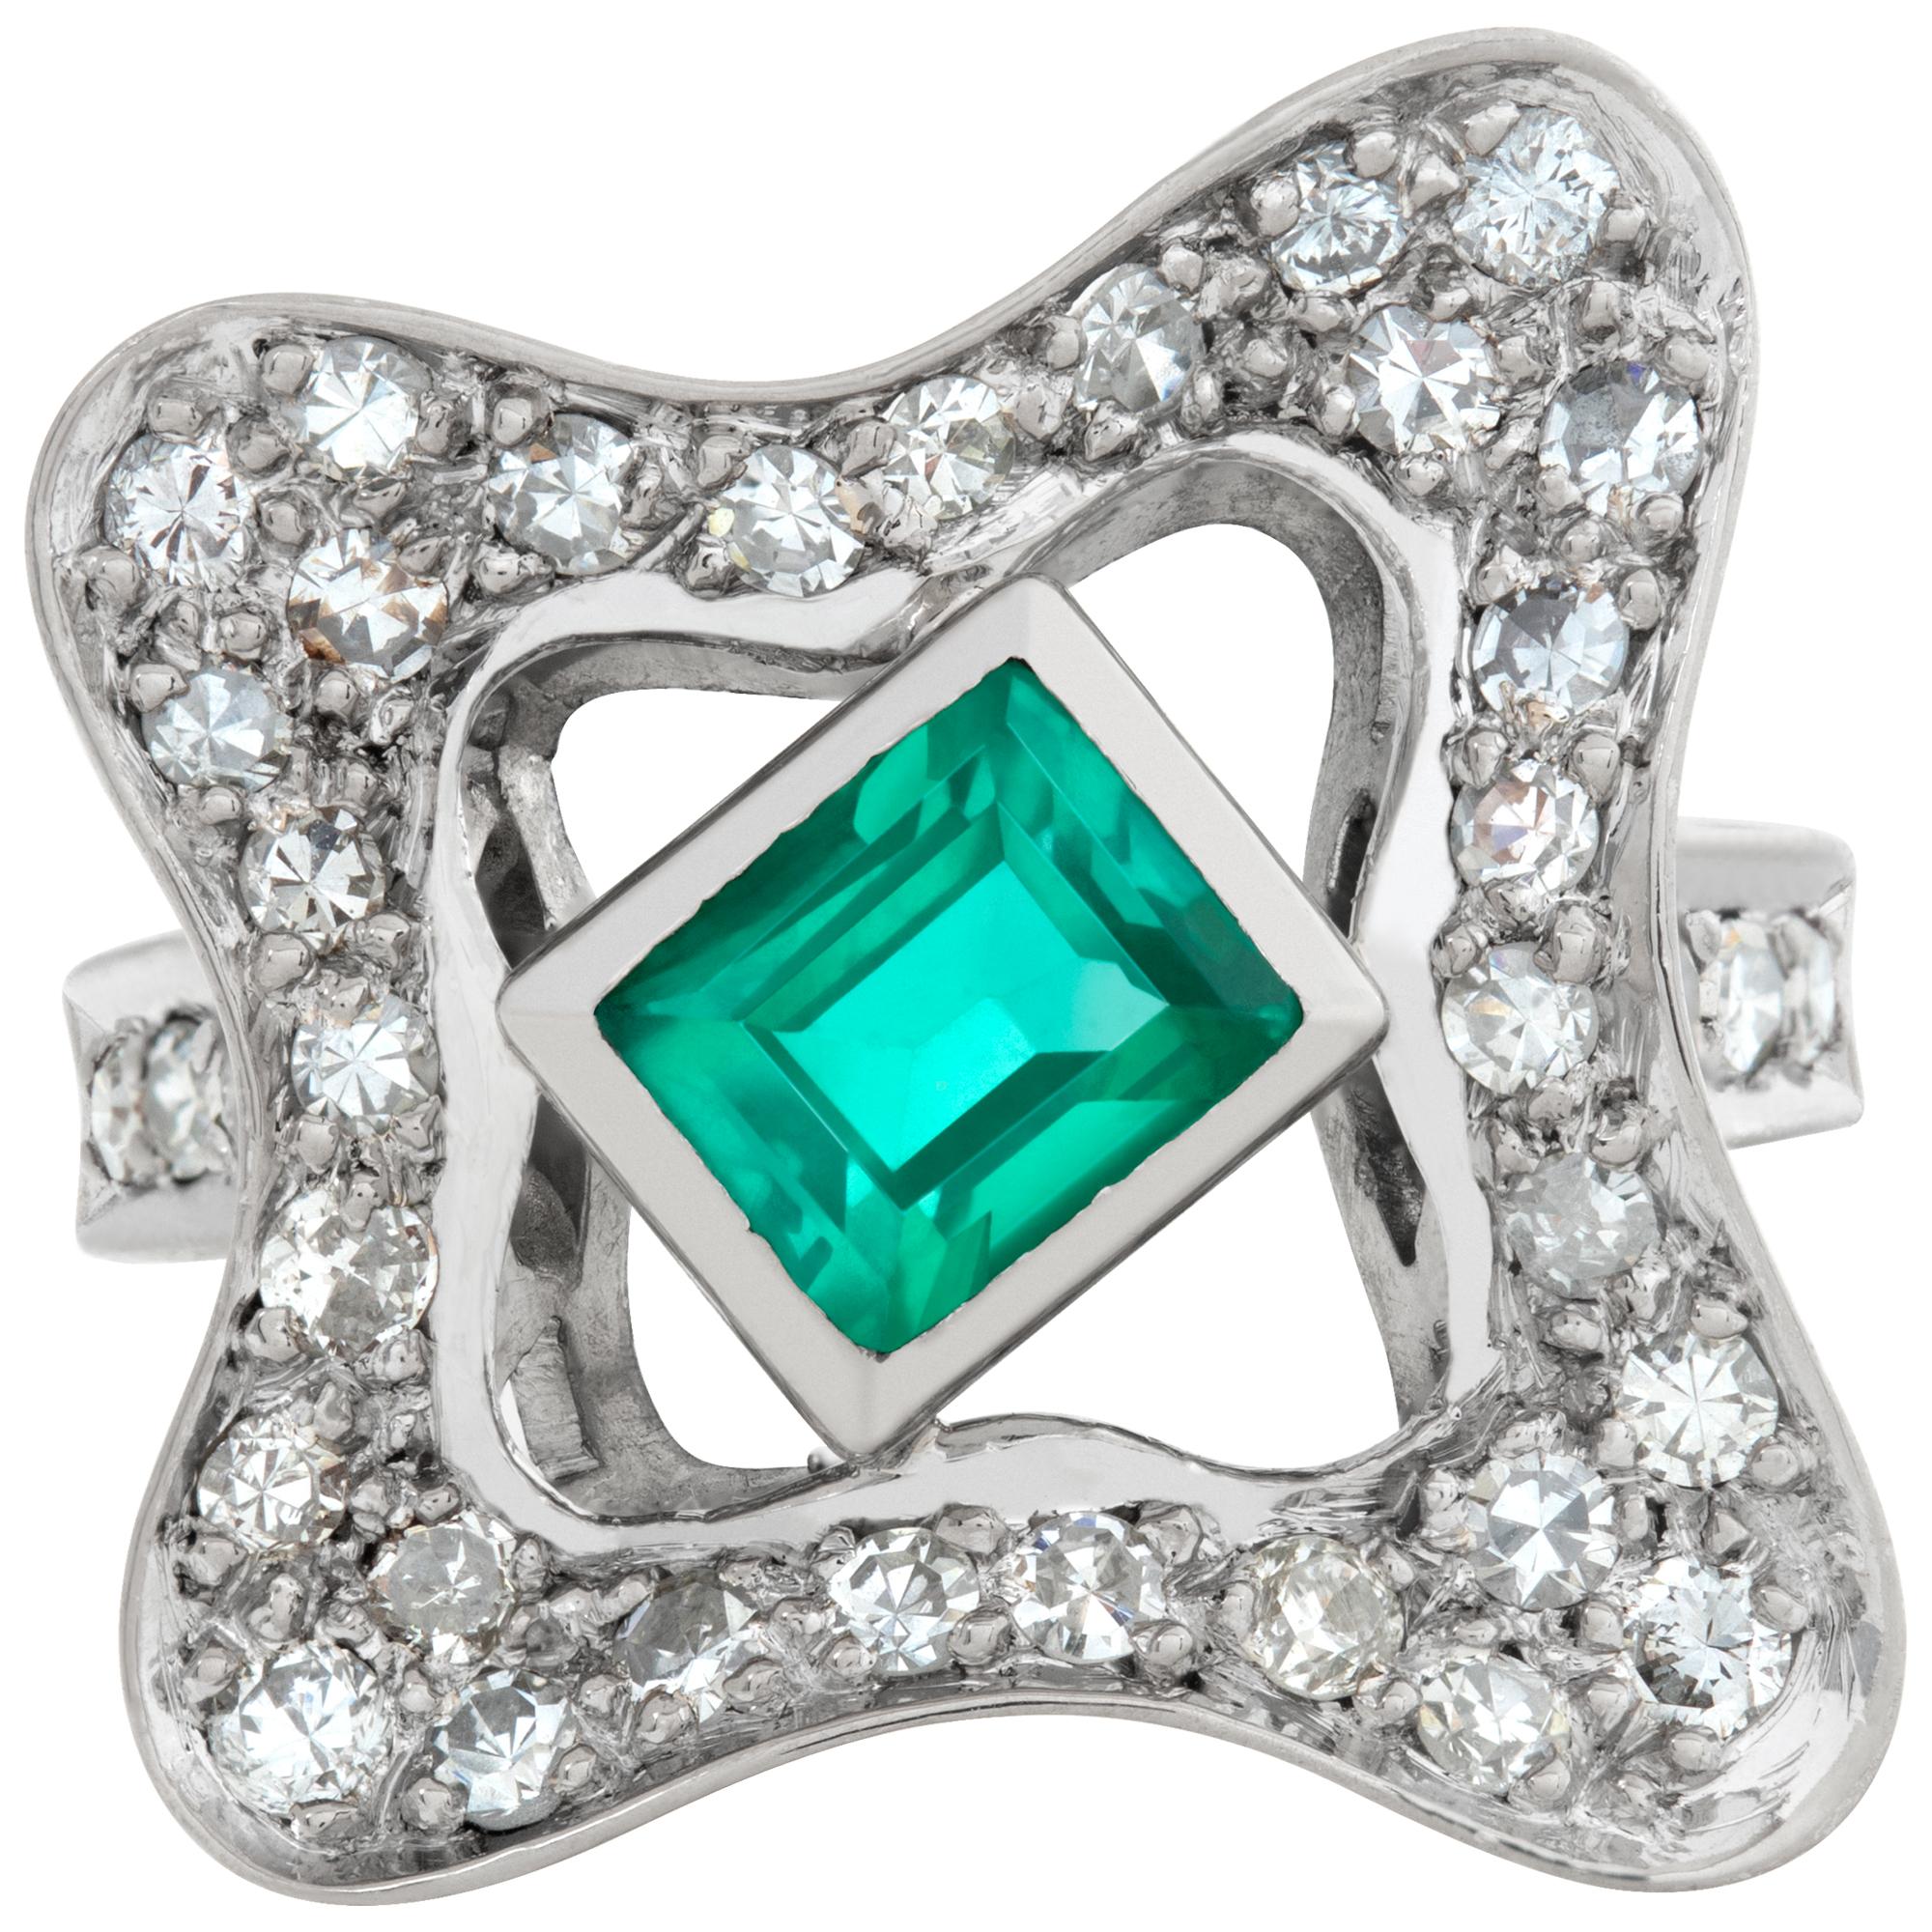 Elegant 18k white gold ring with diamonds and emeralds with approx. 1.50 carat emerald and 0.40 carats in G-H color, VS-SI clarity diamonds. Size 4.5.This Diamond/Emerald ring is currently size 4.5 and some items can be sized up or down, please ask!